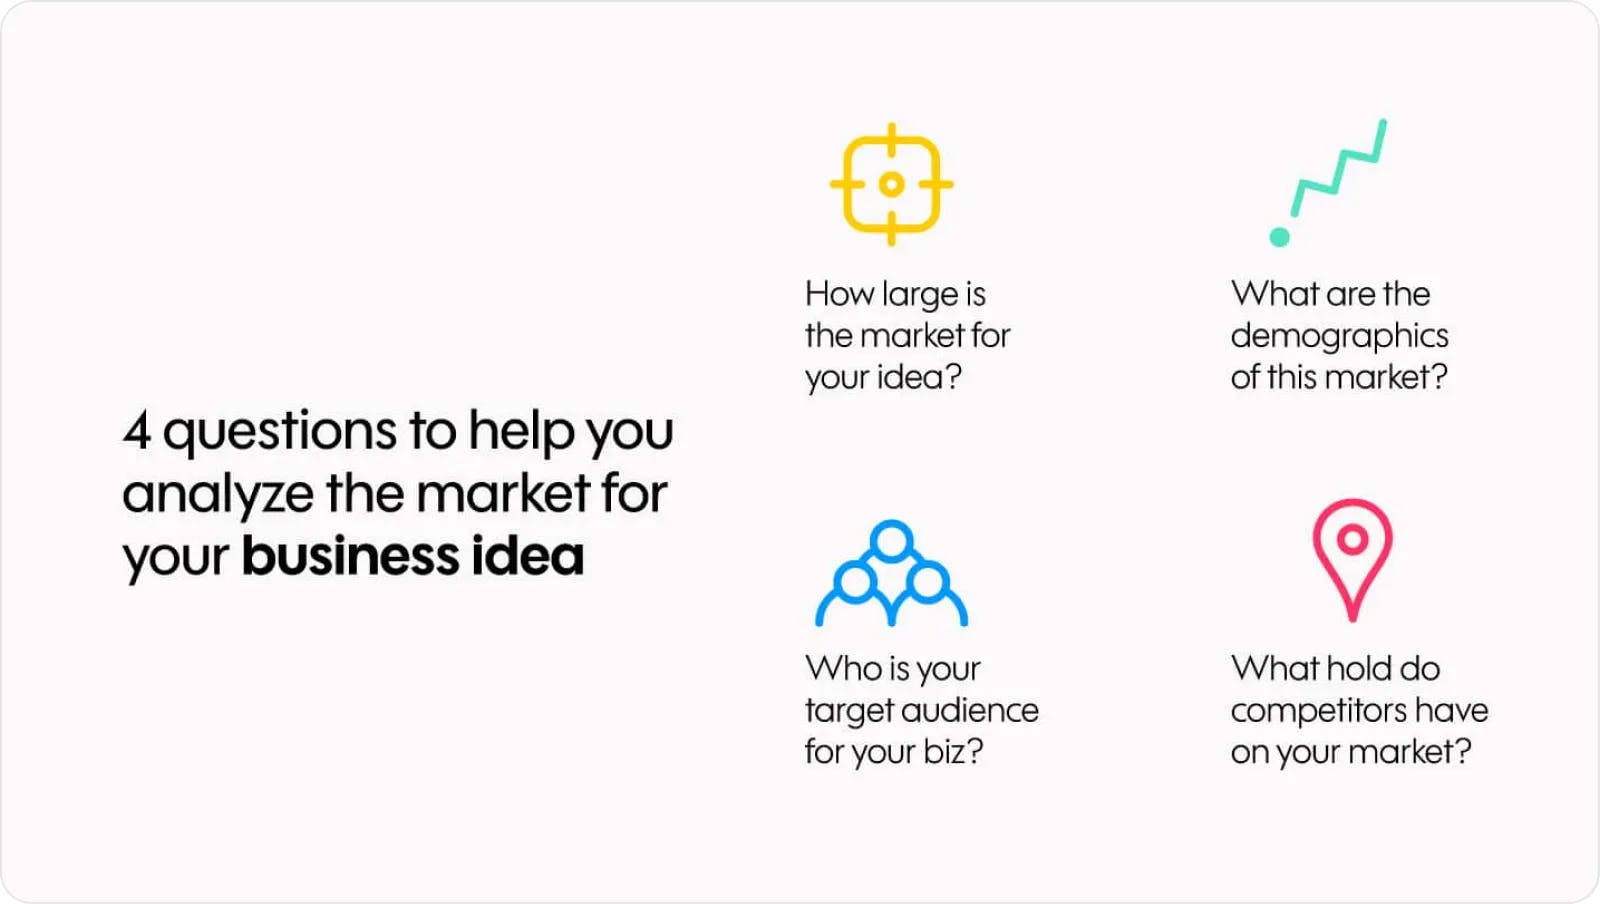 4 questions to help you analyze the market for your business idea